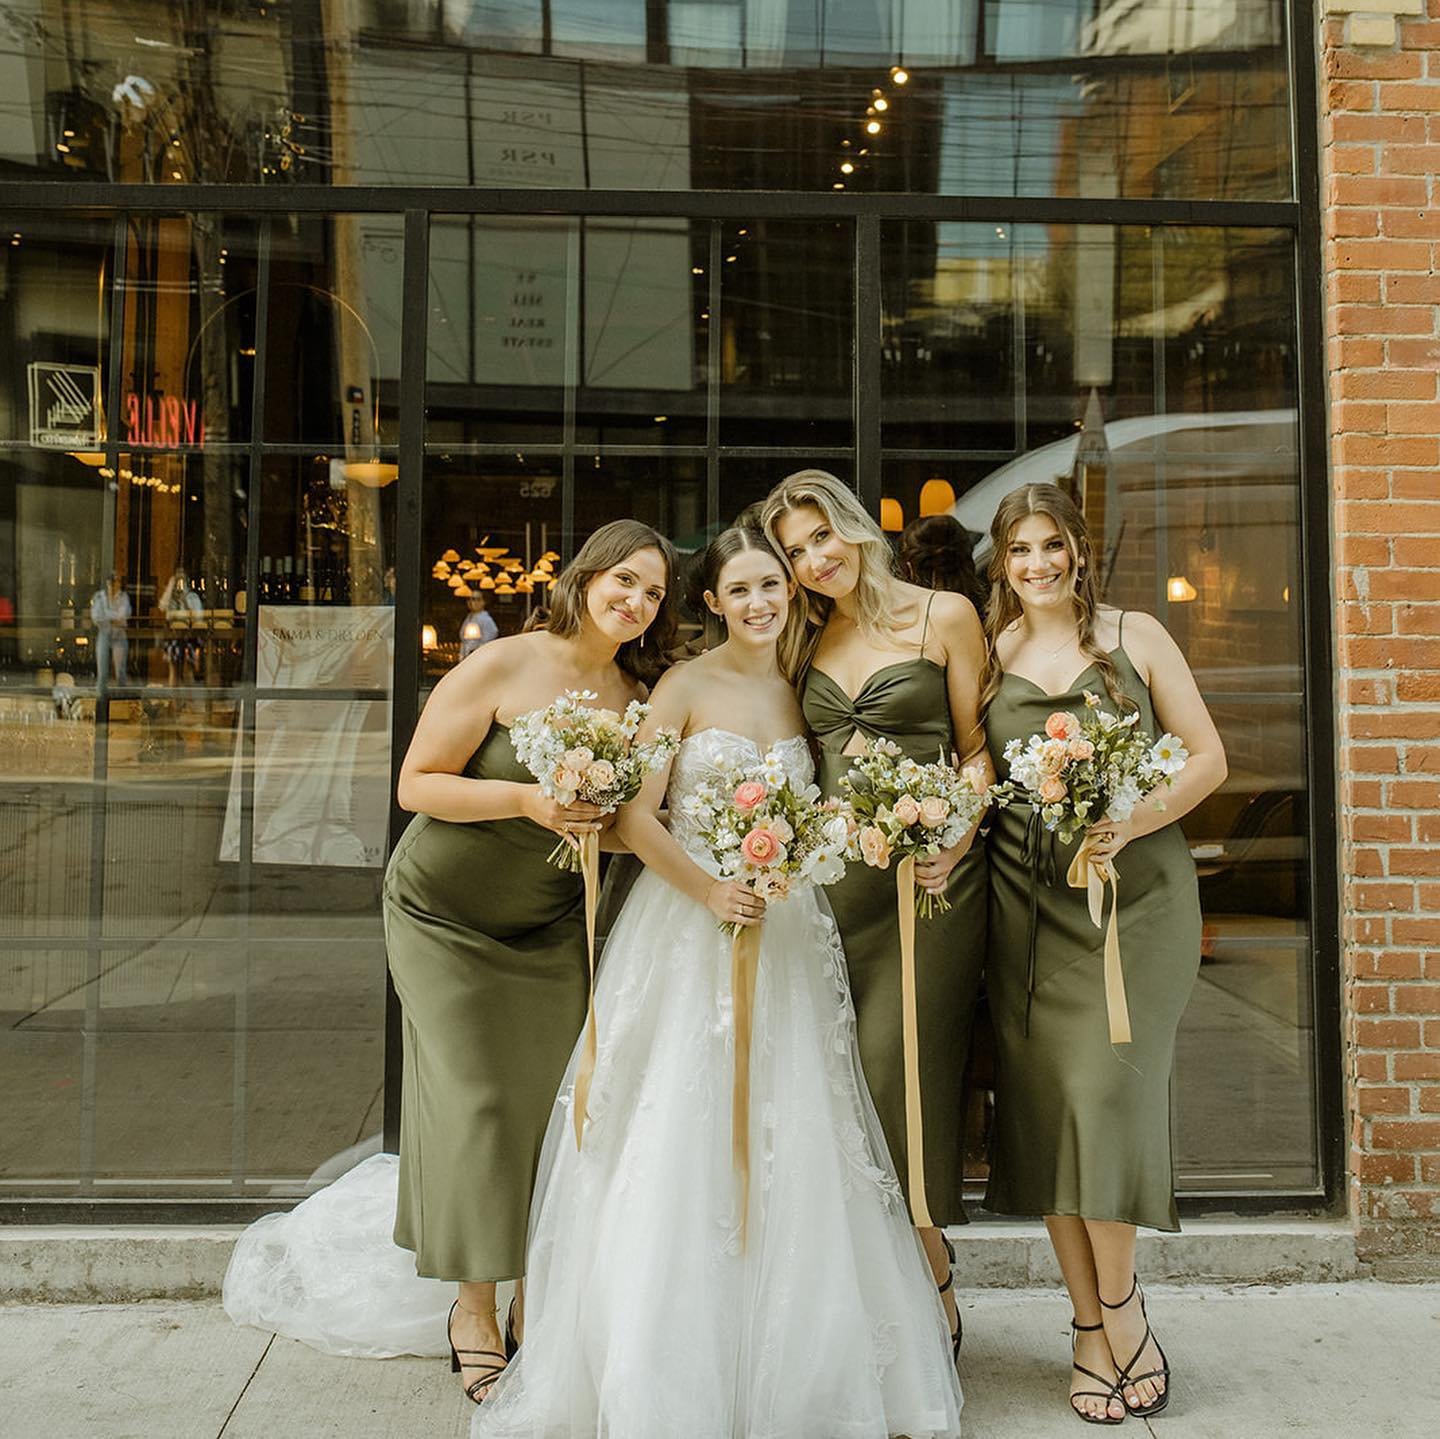 All you need are your bridesmaids &amp; beautiful flowers to brighten up this gloomy Friday 🌧 

Don&rsquo;t mind us, we&rsquo;re still obsessing over E&amp;D&rsquo;s florals over here! 🤩 

Contact us today to talk wedding party florals 🫶🏽 Link in